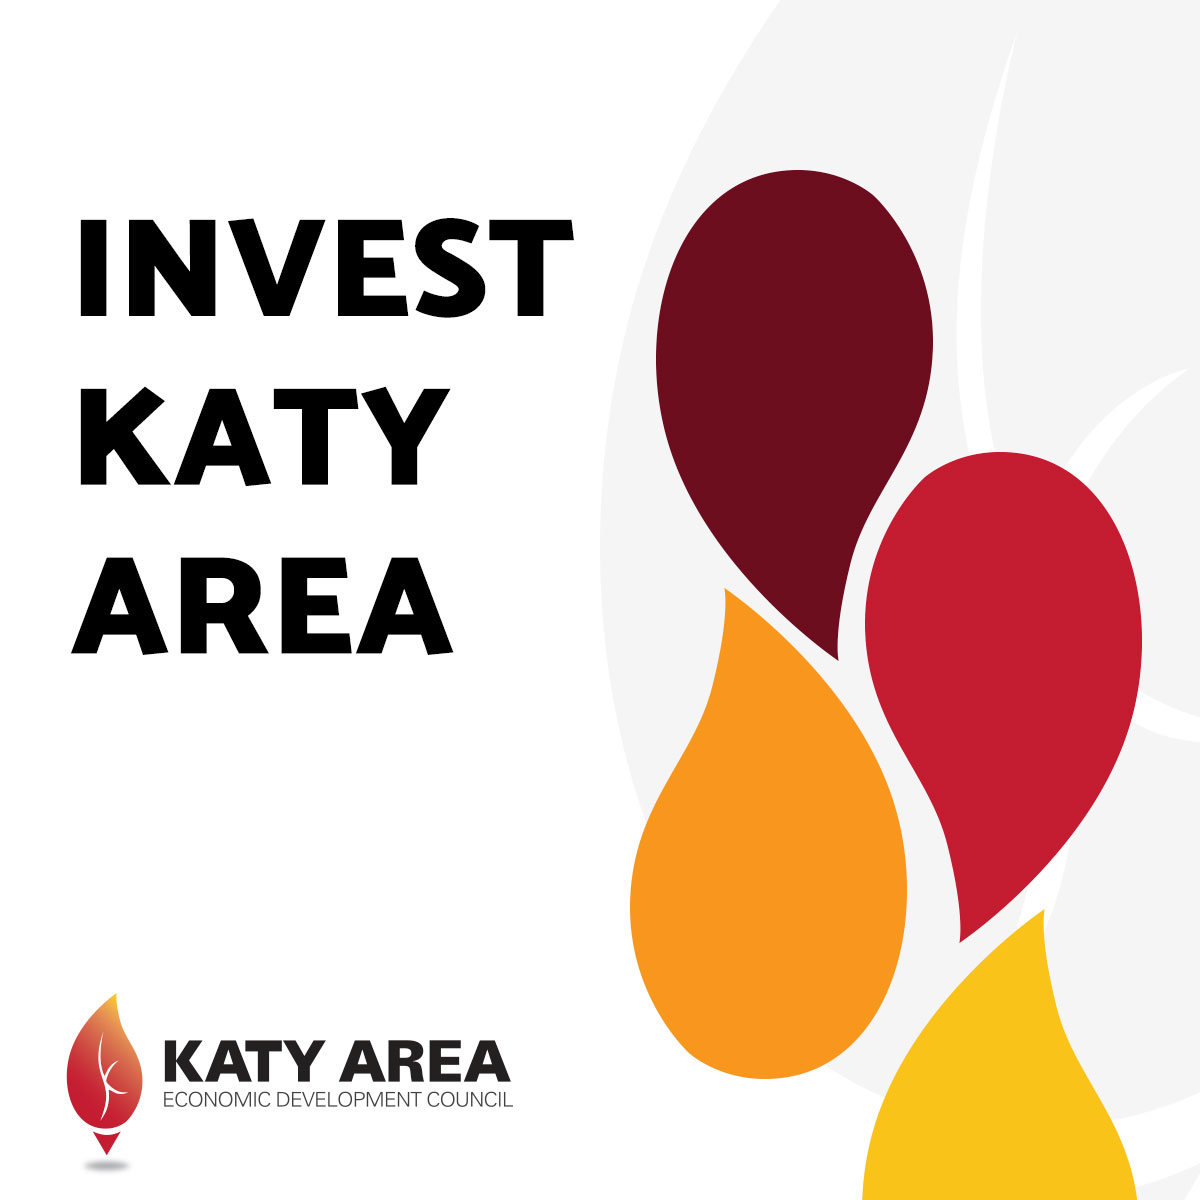 Enhance your visibility and grow your business network with membership to Katy Area EDC! Photo